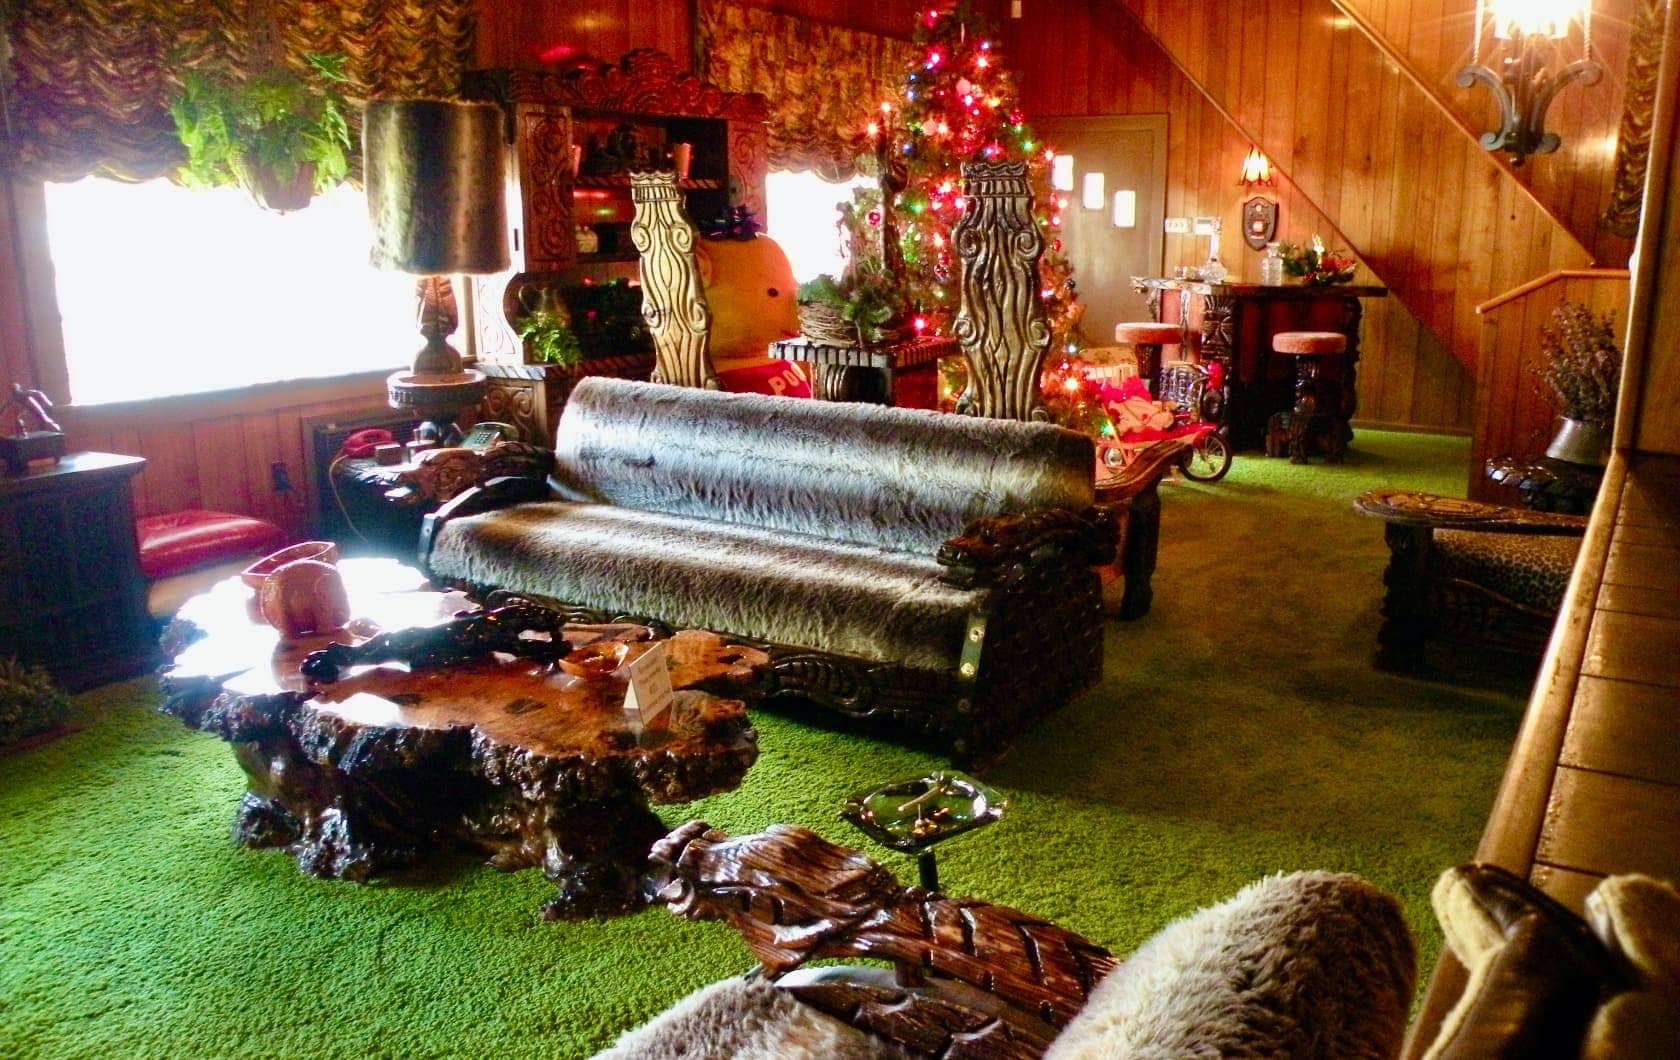 Living room with odd furniture and green carpet